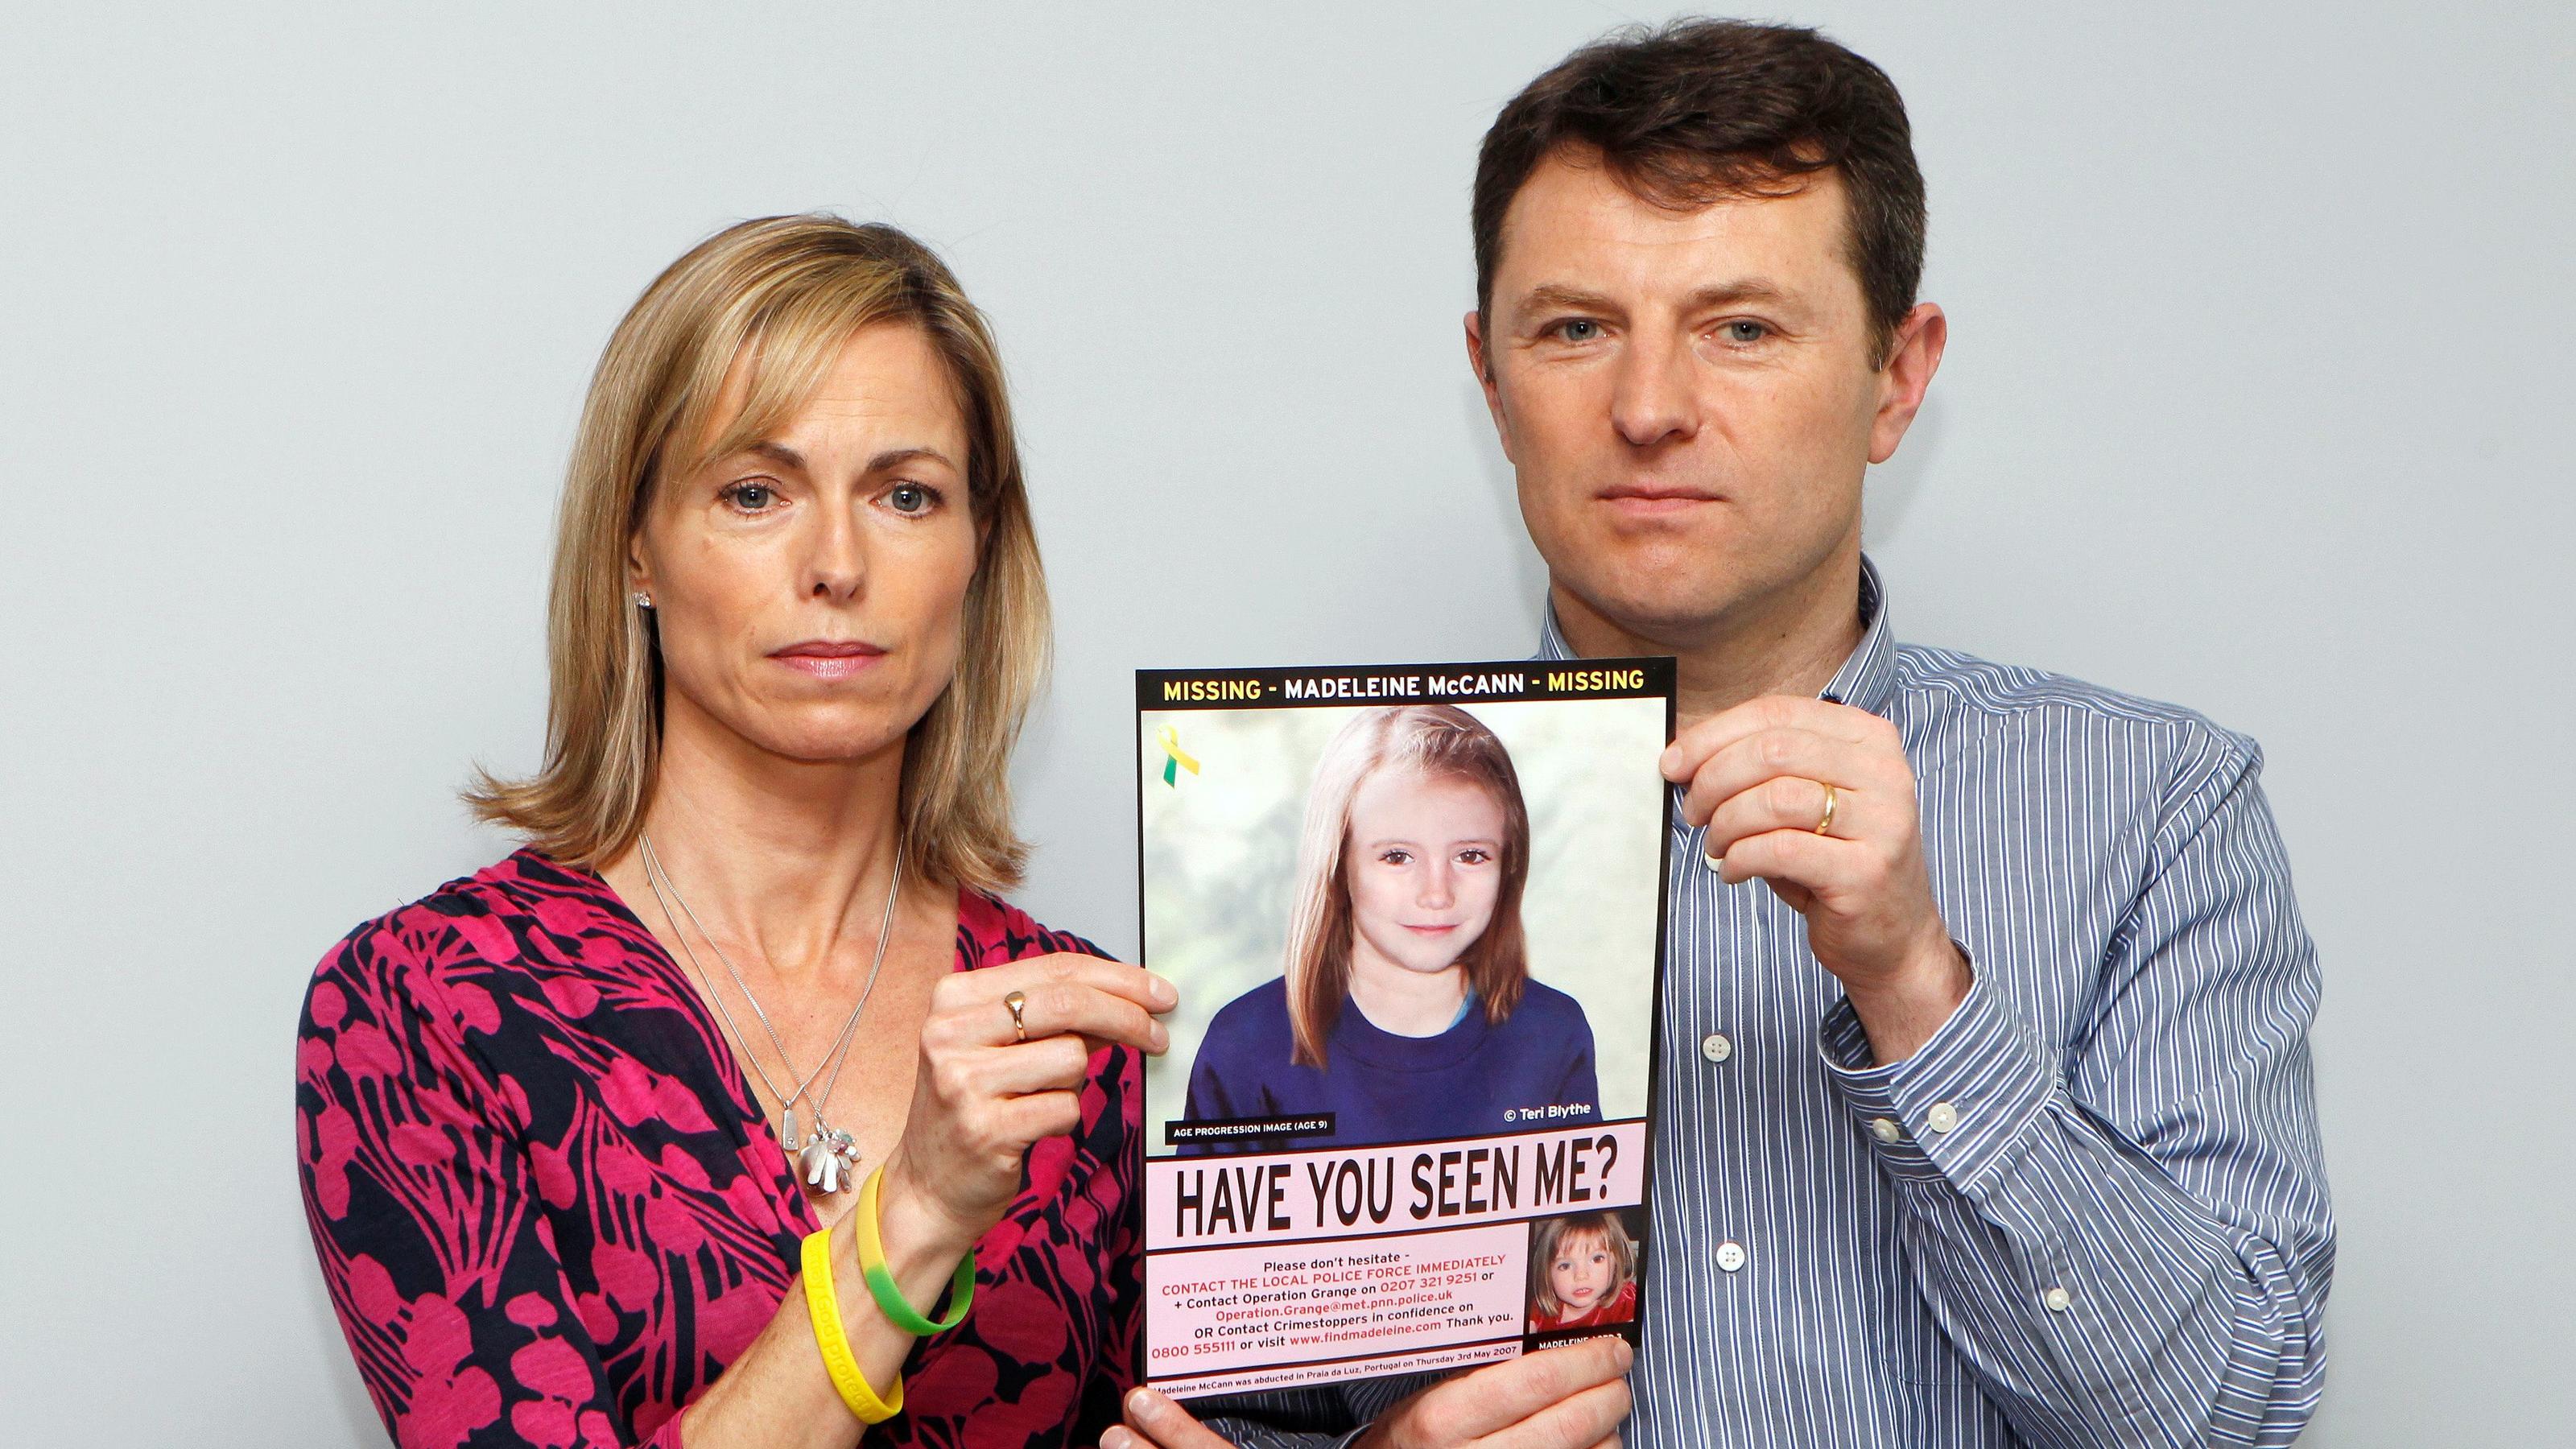 FILE PHOTO: Kate and Gerry McCann pose with a computer generated image of how their missing daughter Madeleine might look now, during a news conference in London May 2, 2012. REUTERS/Andrew Winning/File Photo